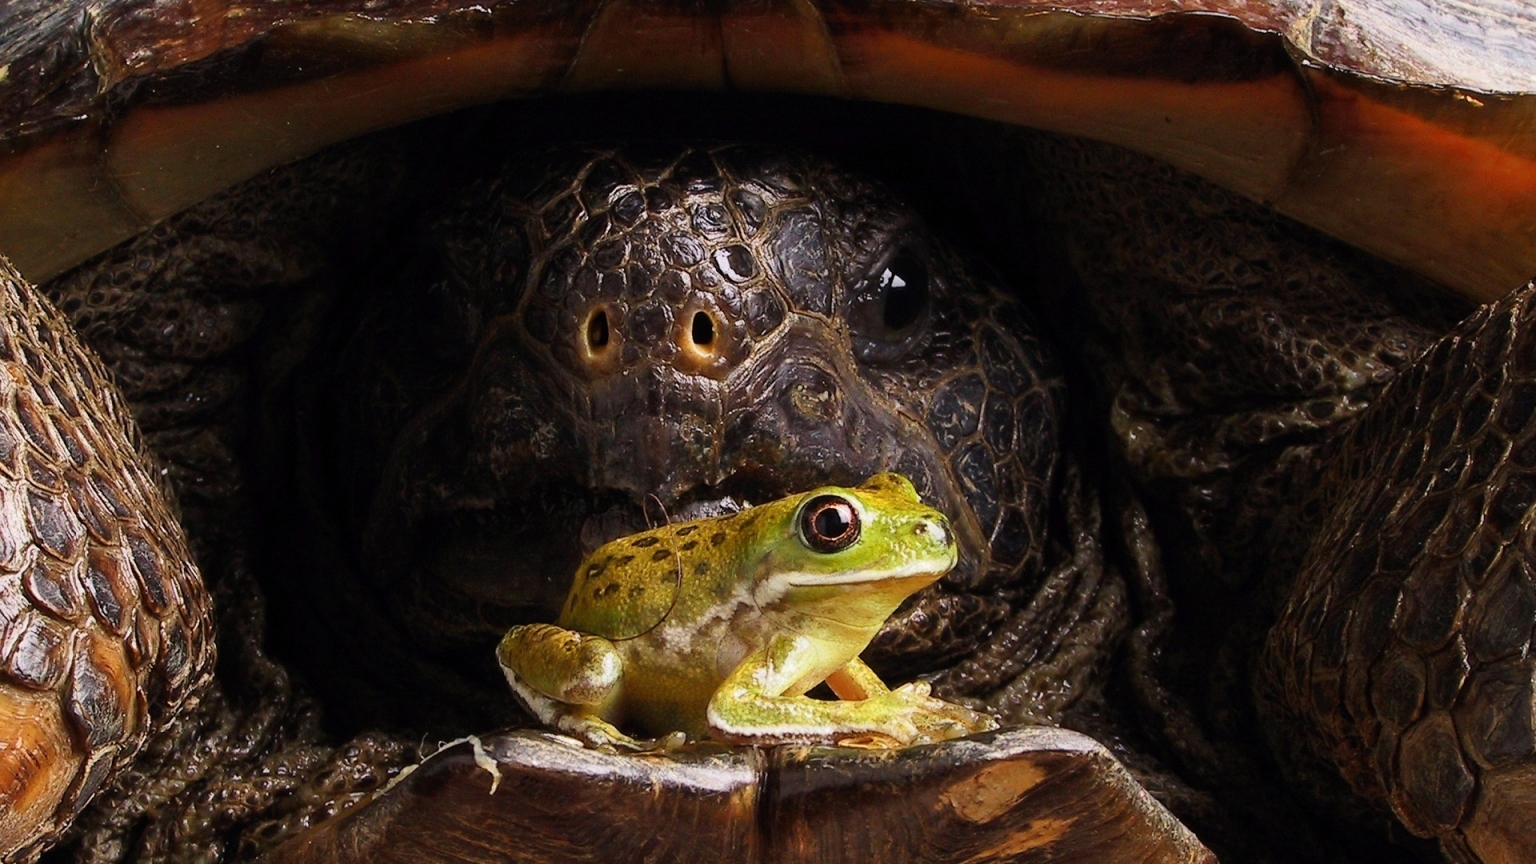 Big turtle and little frog for 1536 x 864 HDTV resolution